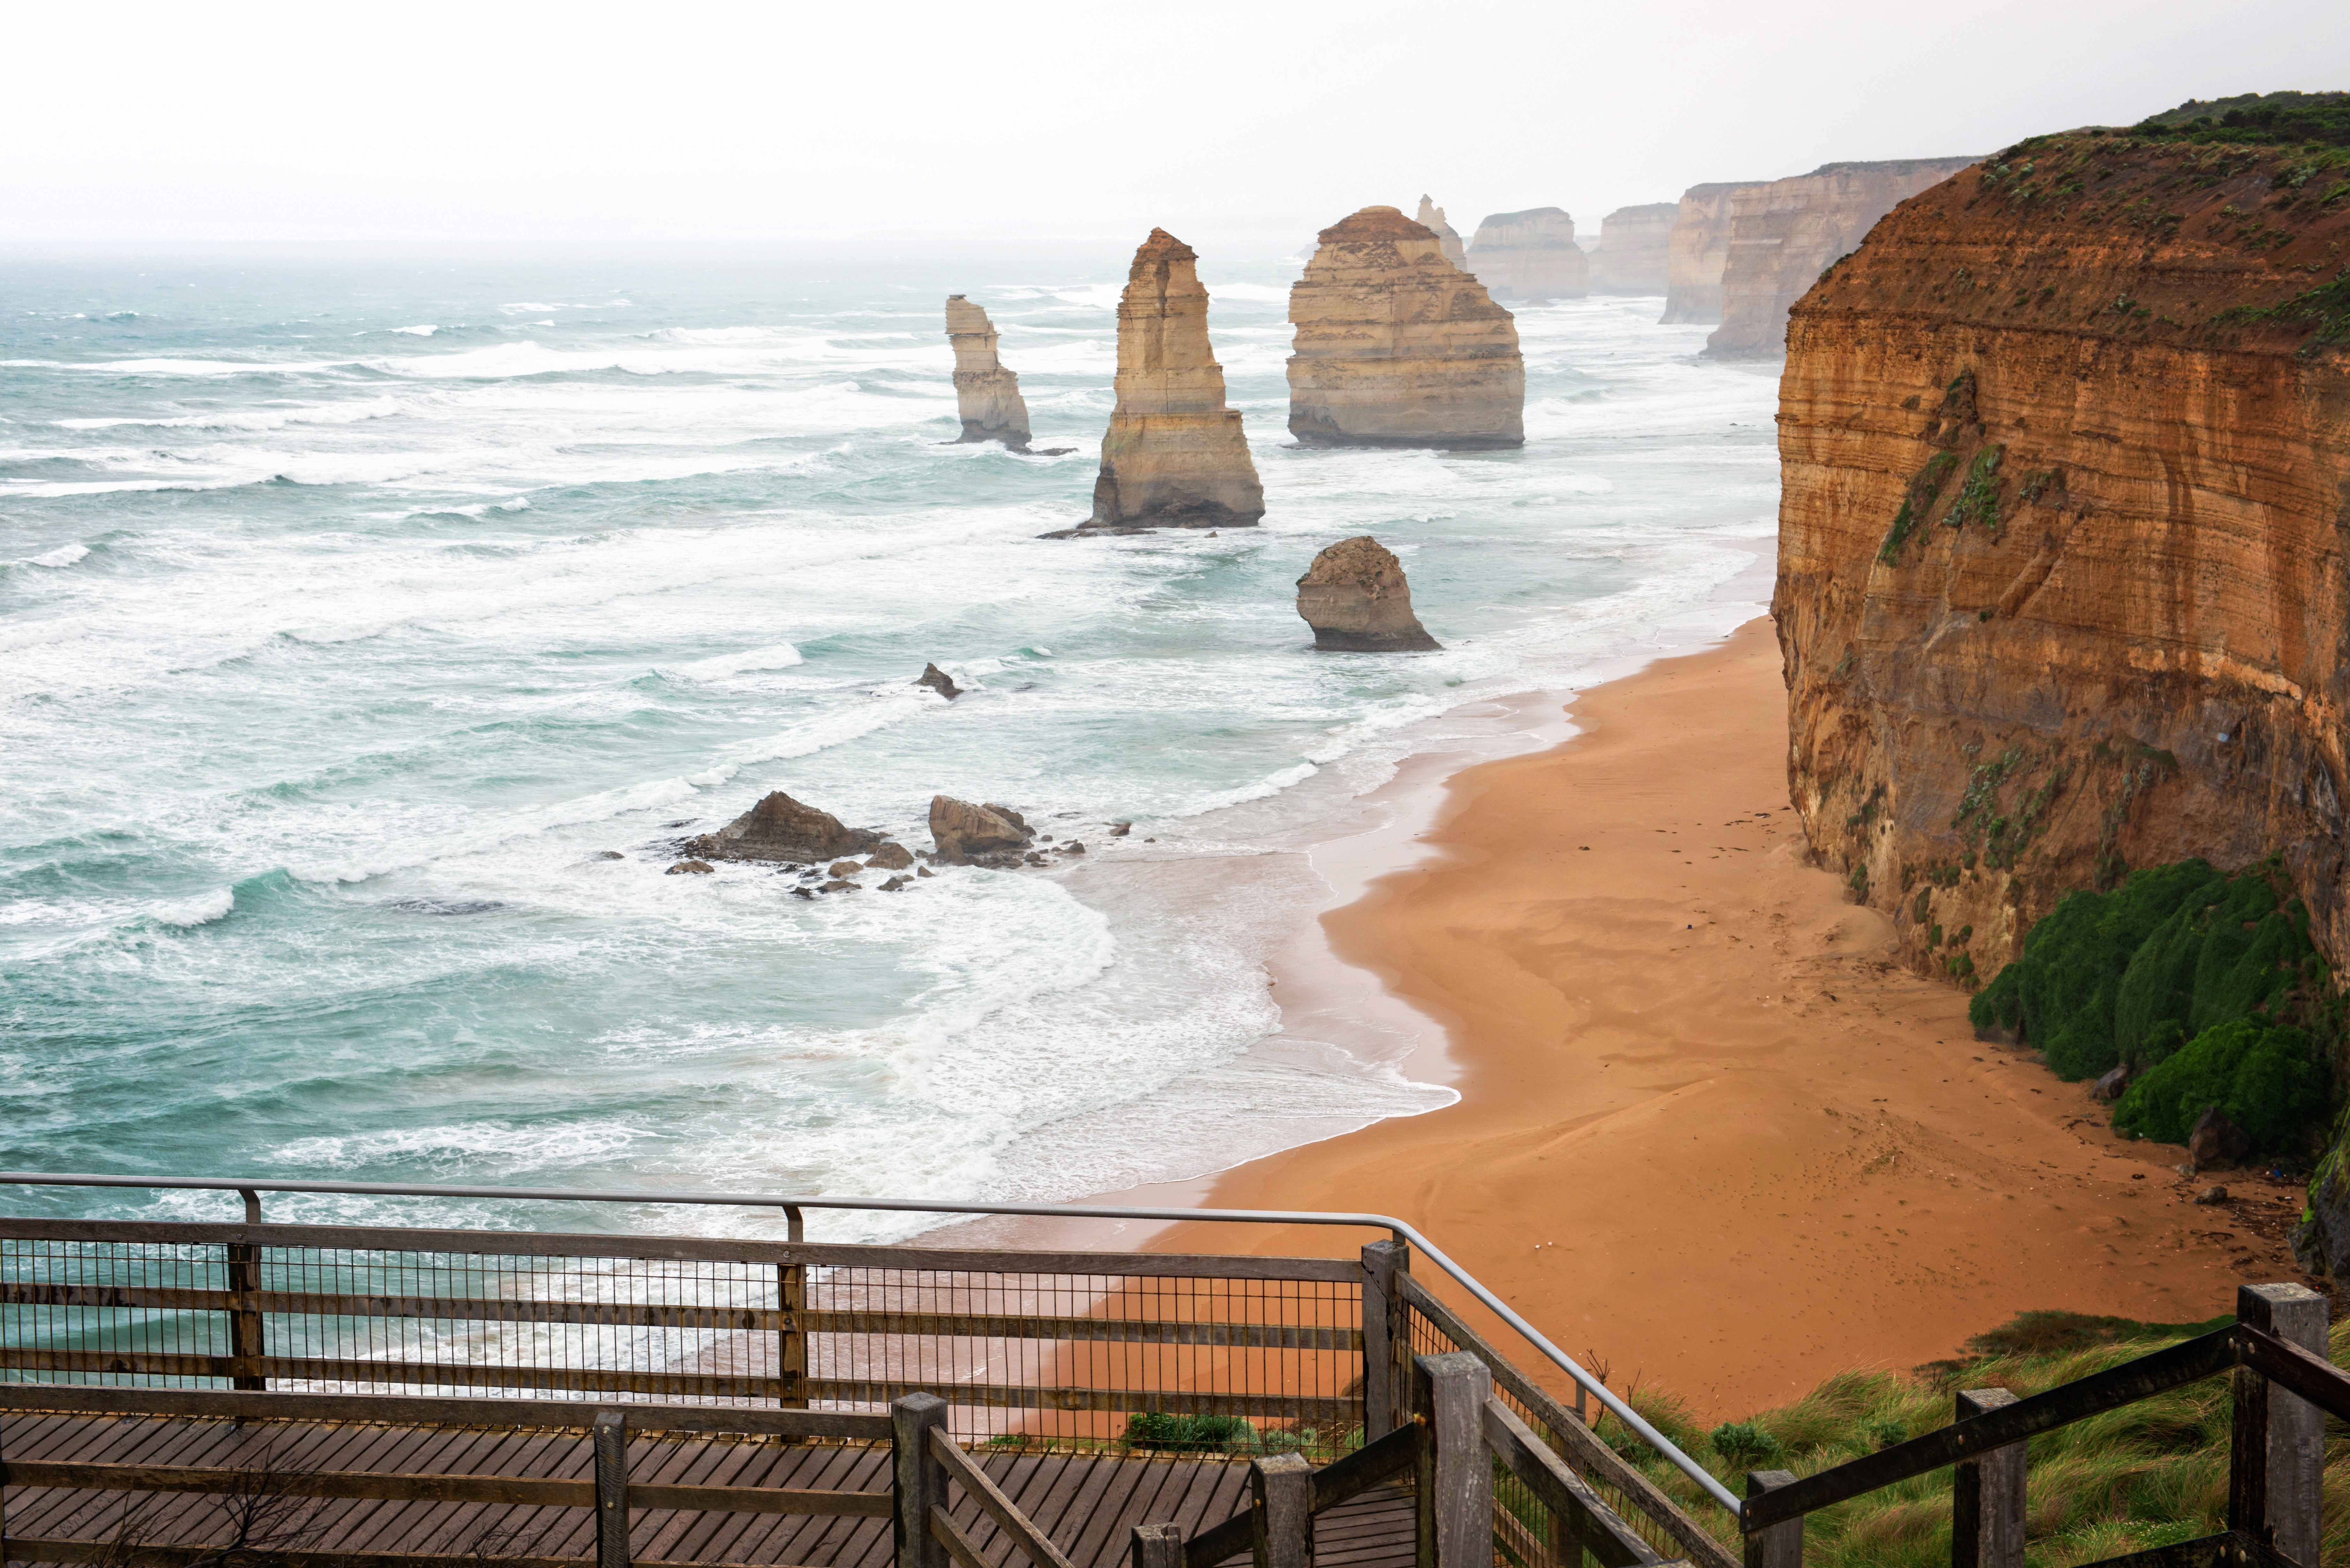 Art lover's holiday: Lose yourself in amazing Australia